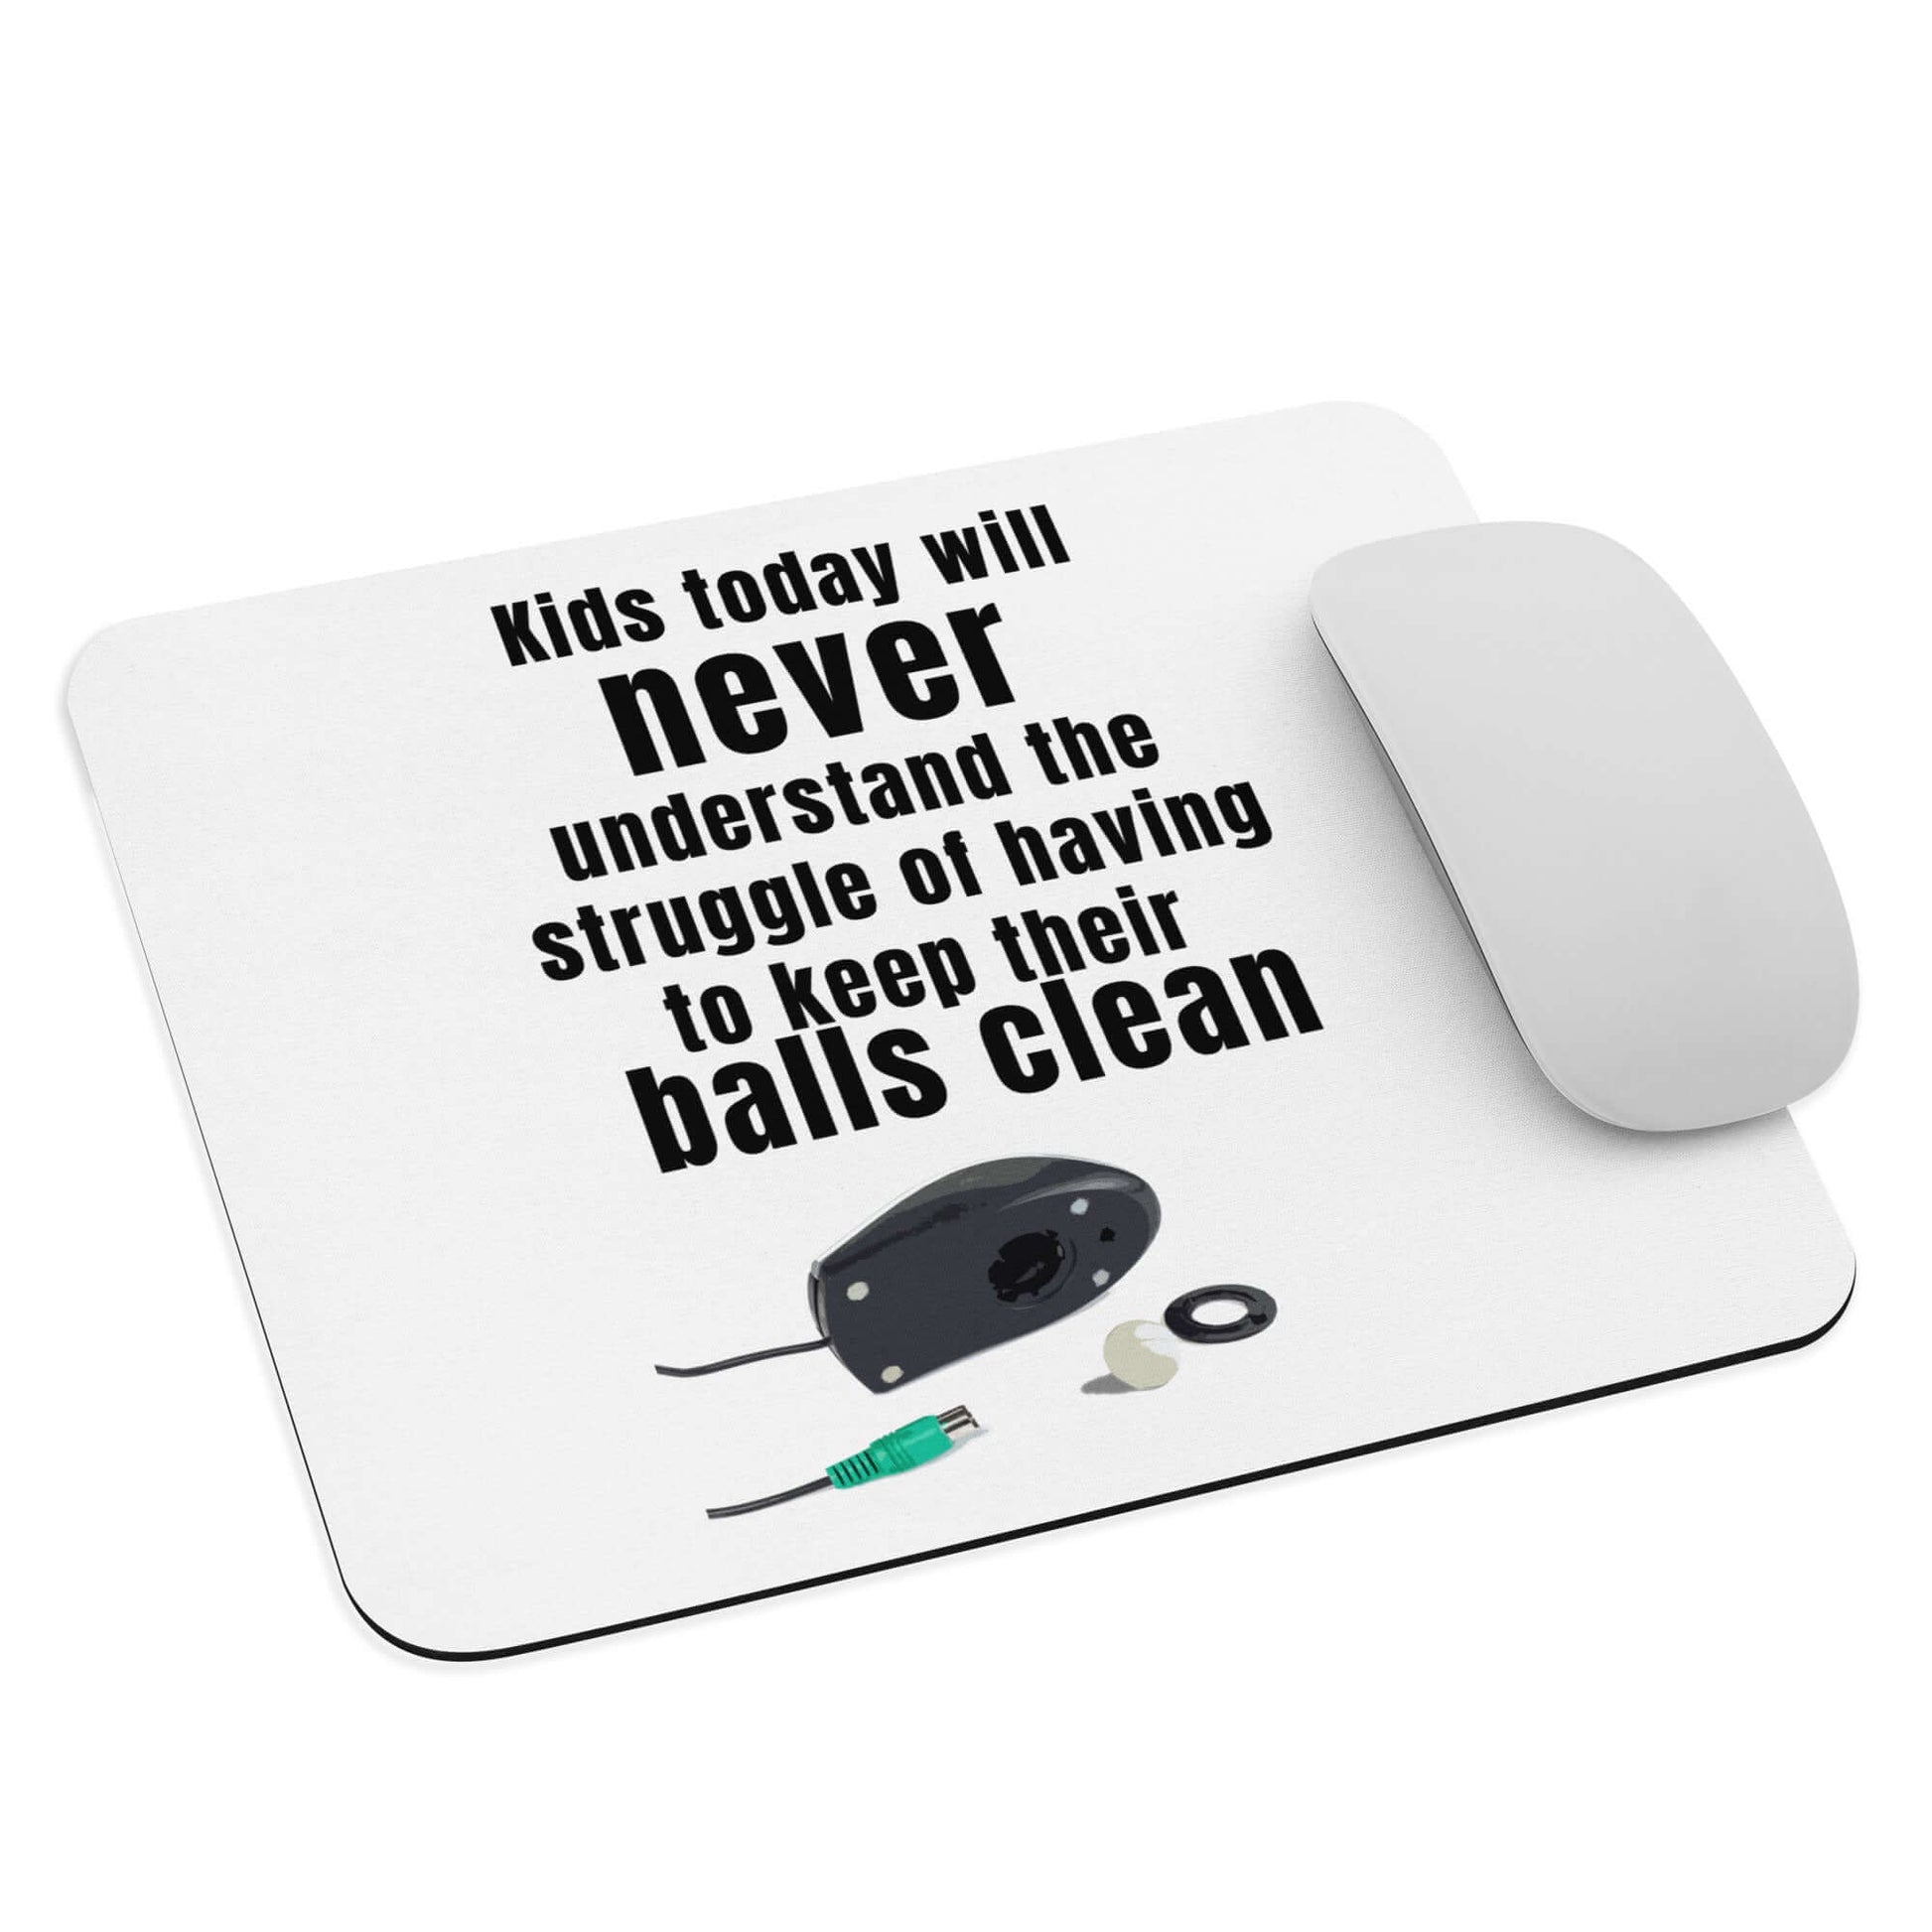 Kids today will never understand the struggle of having to keep their balls clean - Mouse pad - Horrible Designs